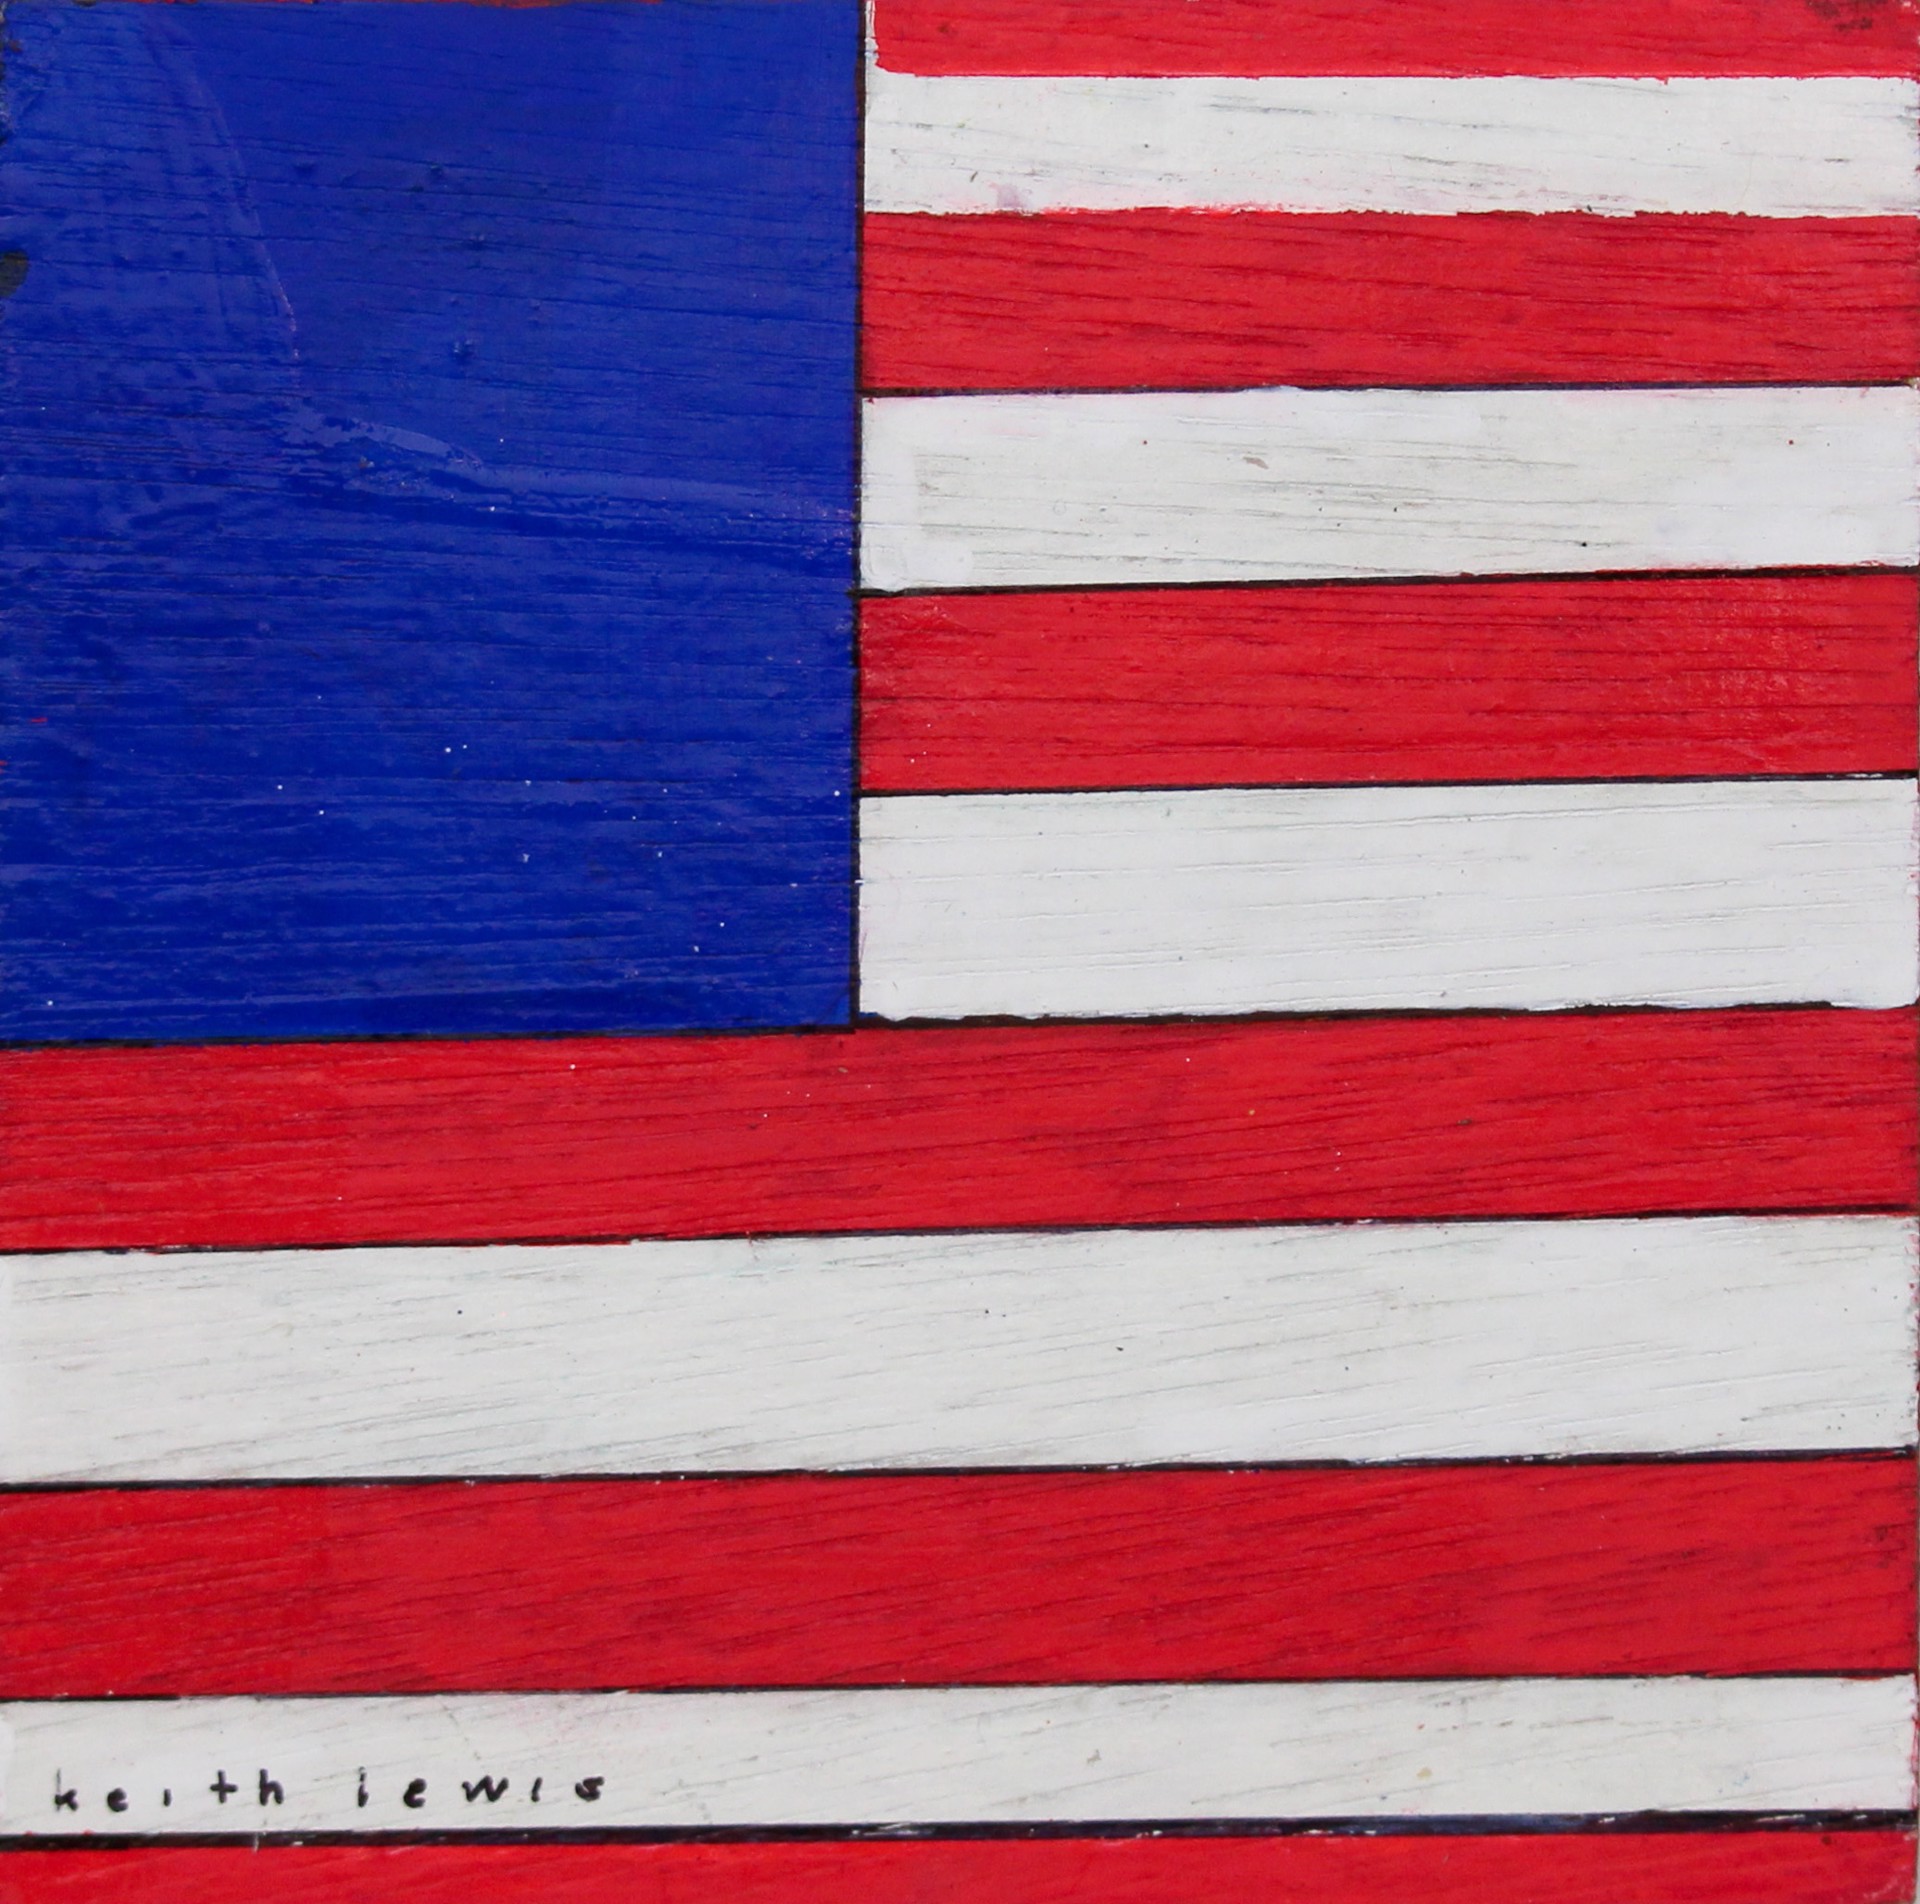 Coaster with American Flag and Green Star (1) by Keith Lewis